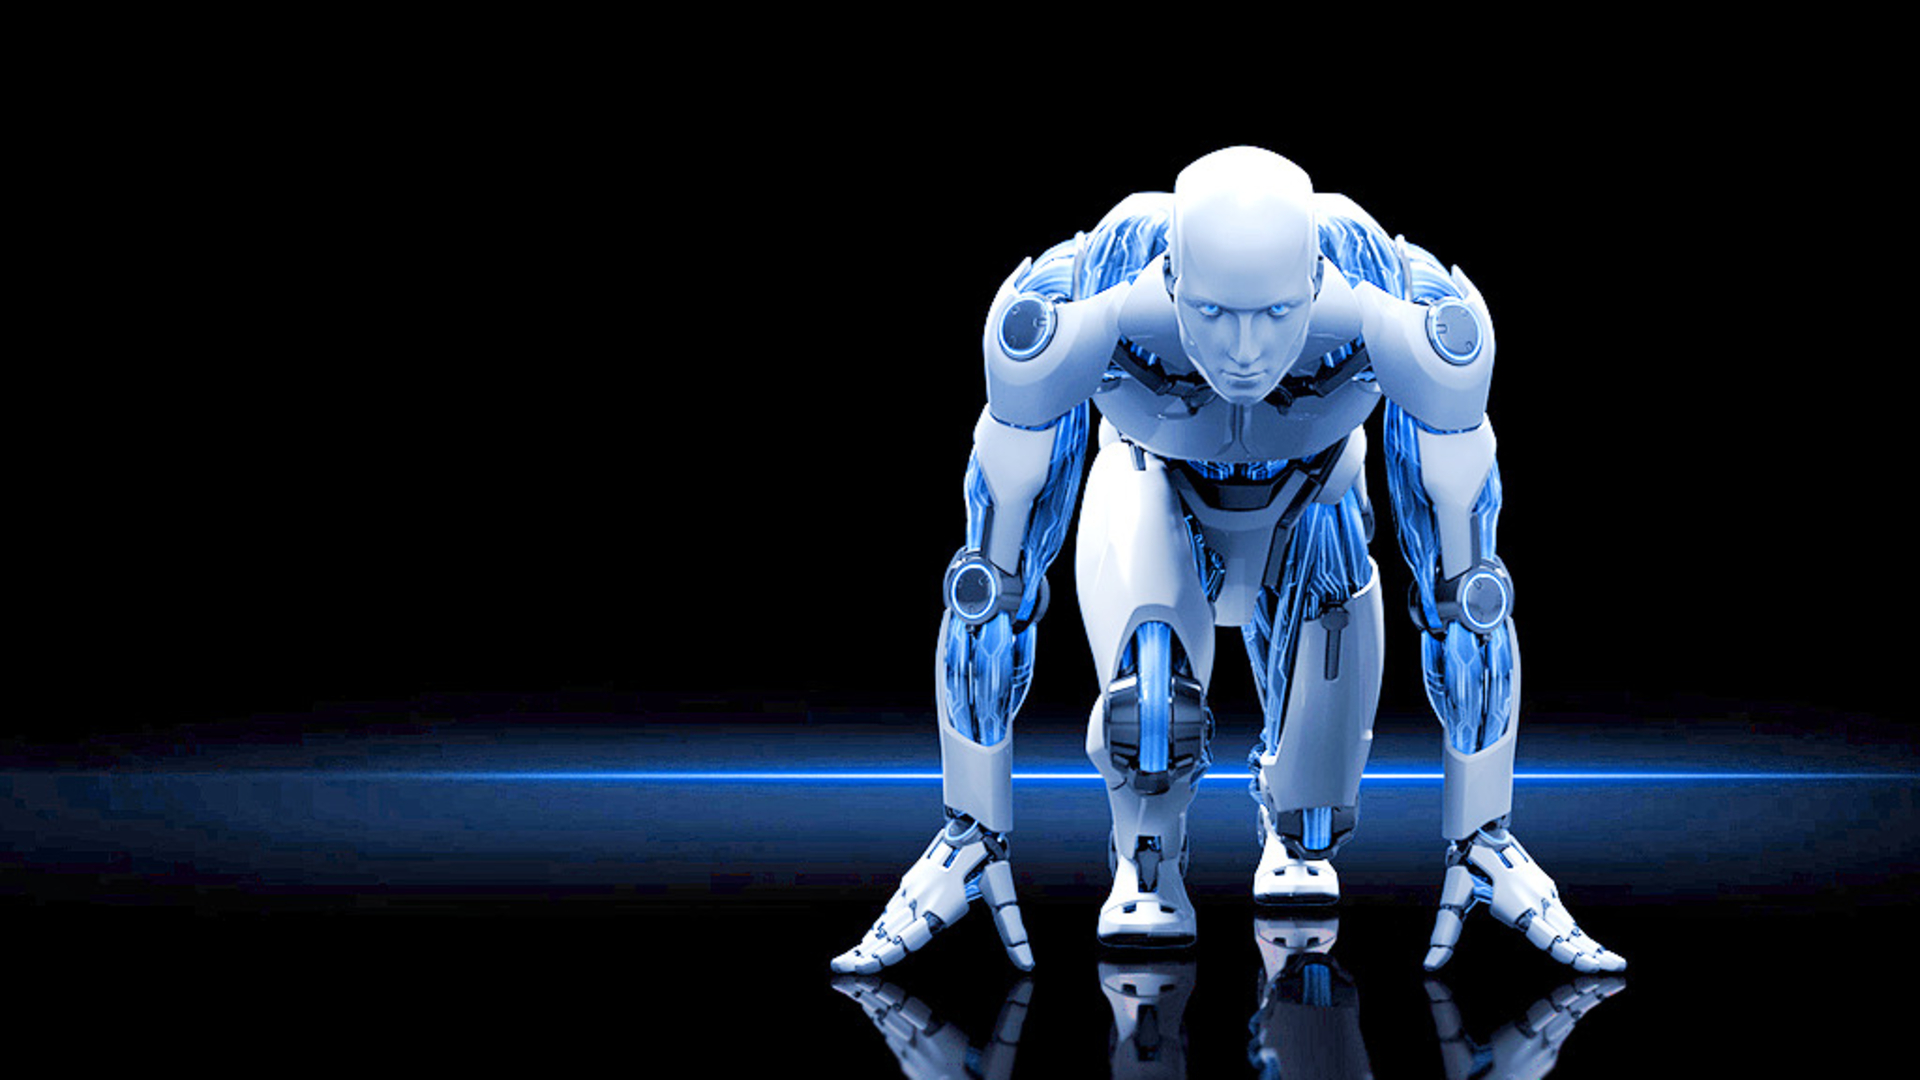 Are Cyborgs the Next Step in Human Evolution? - Big Think